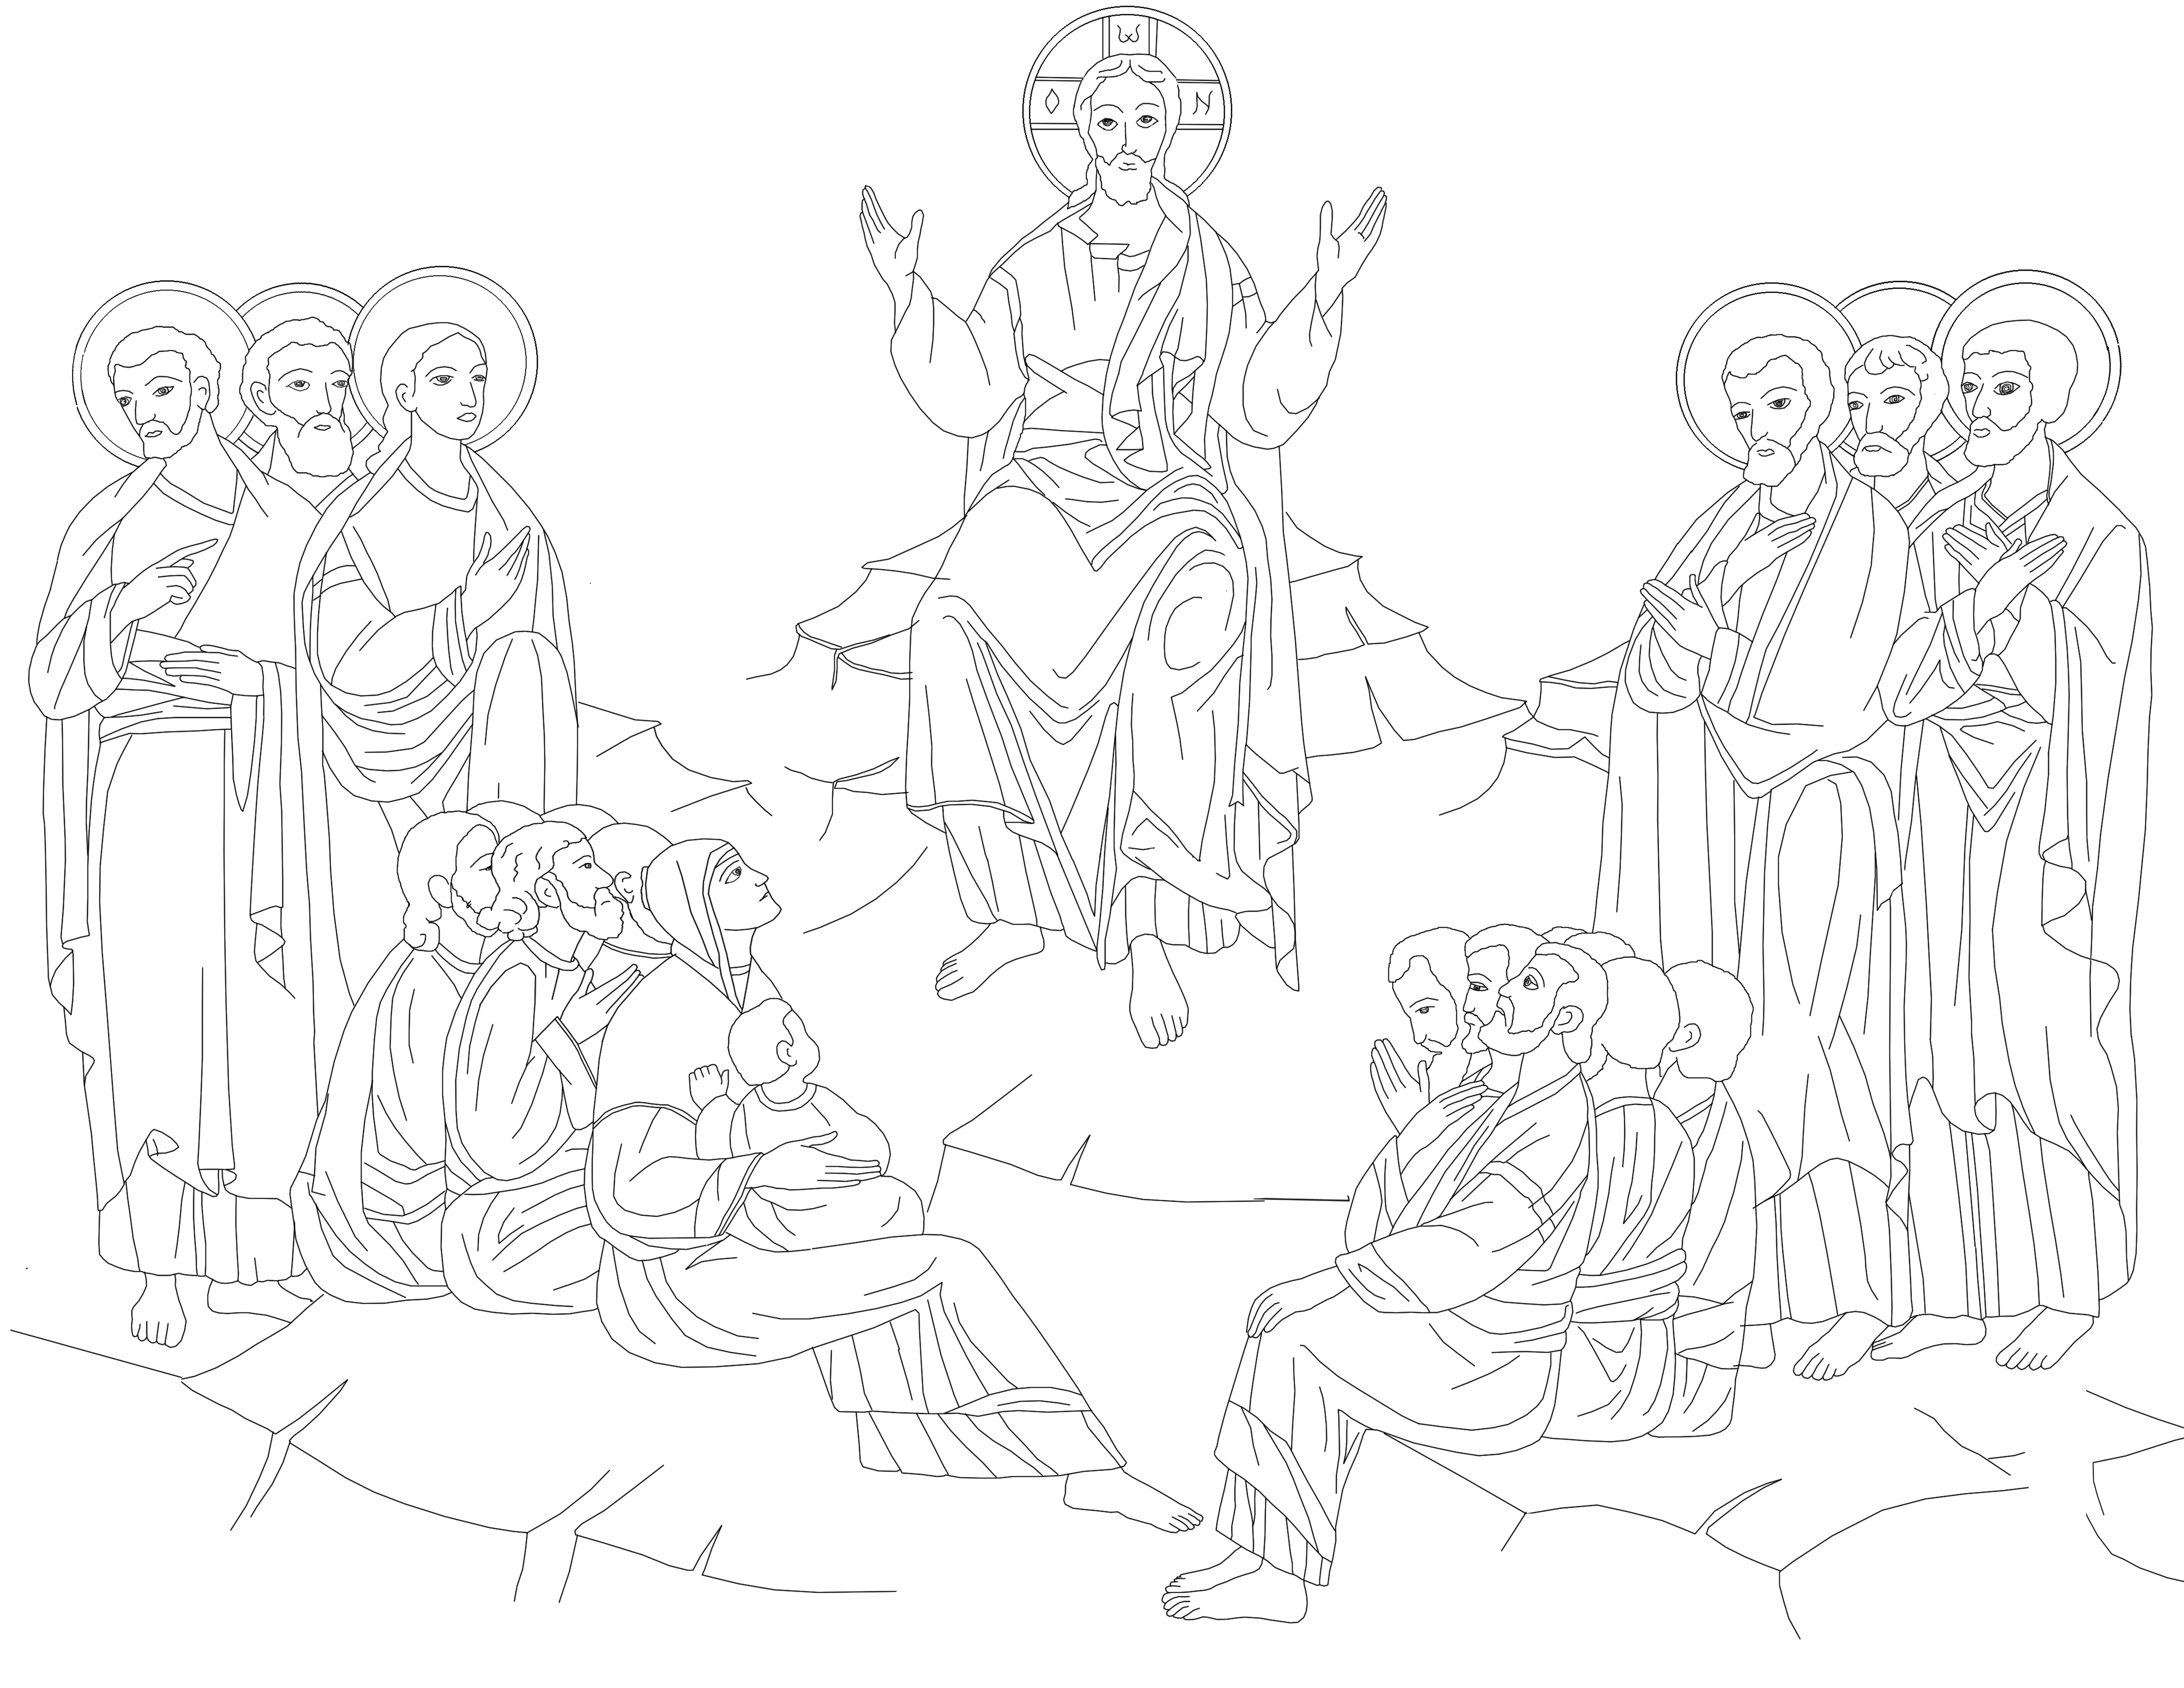 sermon-on-the-mount-coloring-page-at-getdrawings-free-download